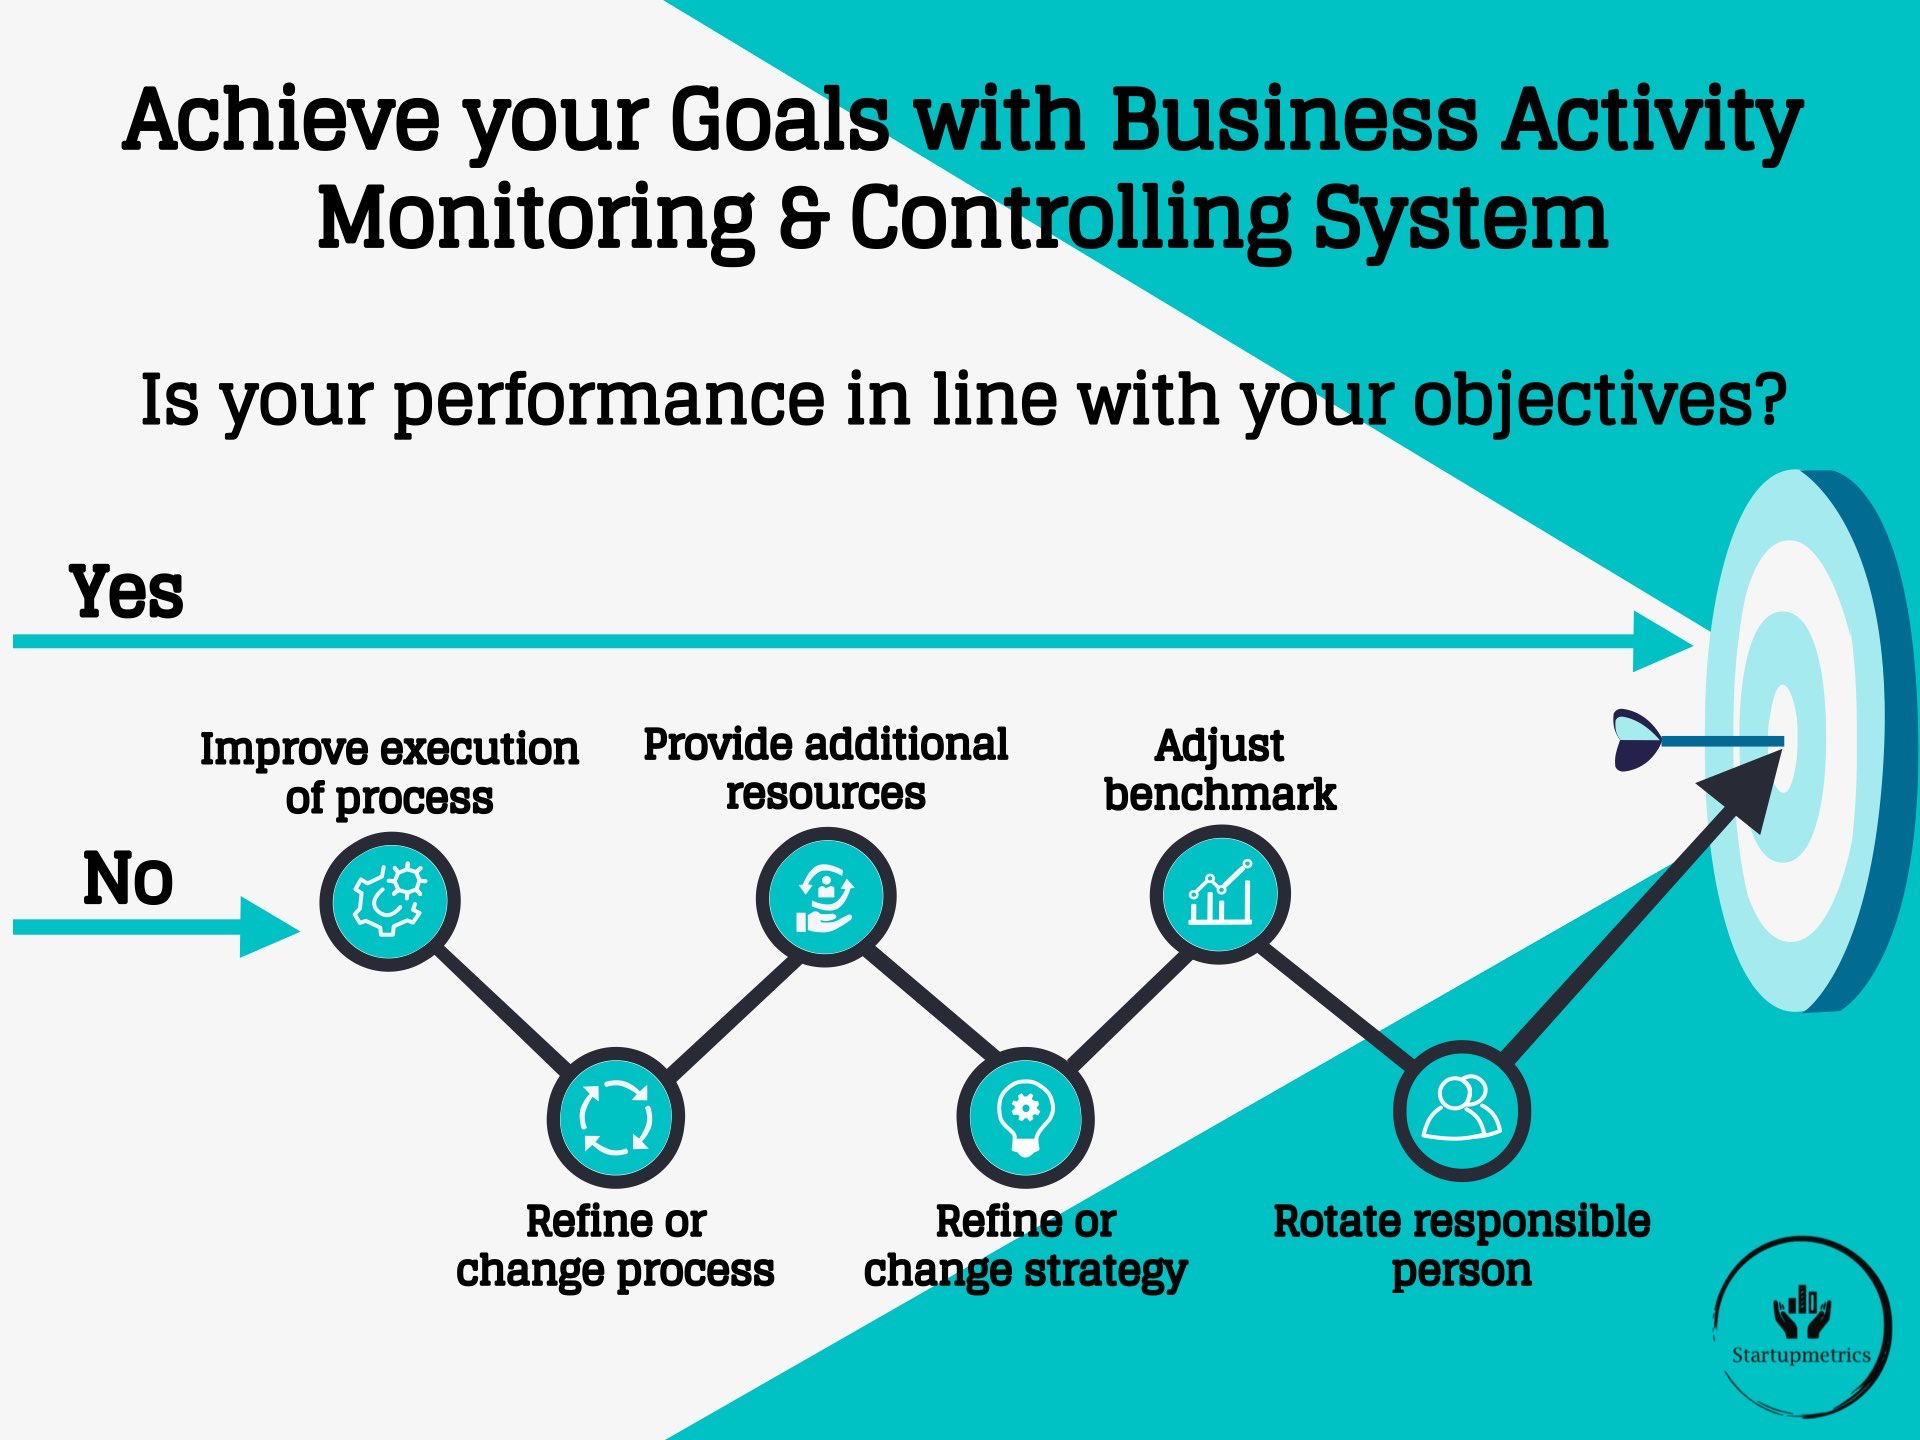 process of Business Activity Monitoring and Controlling